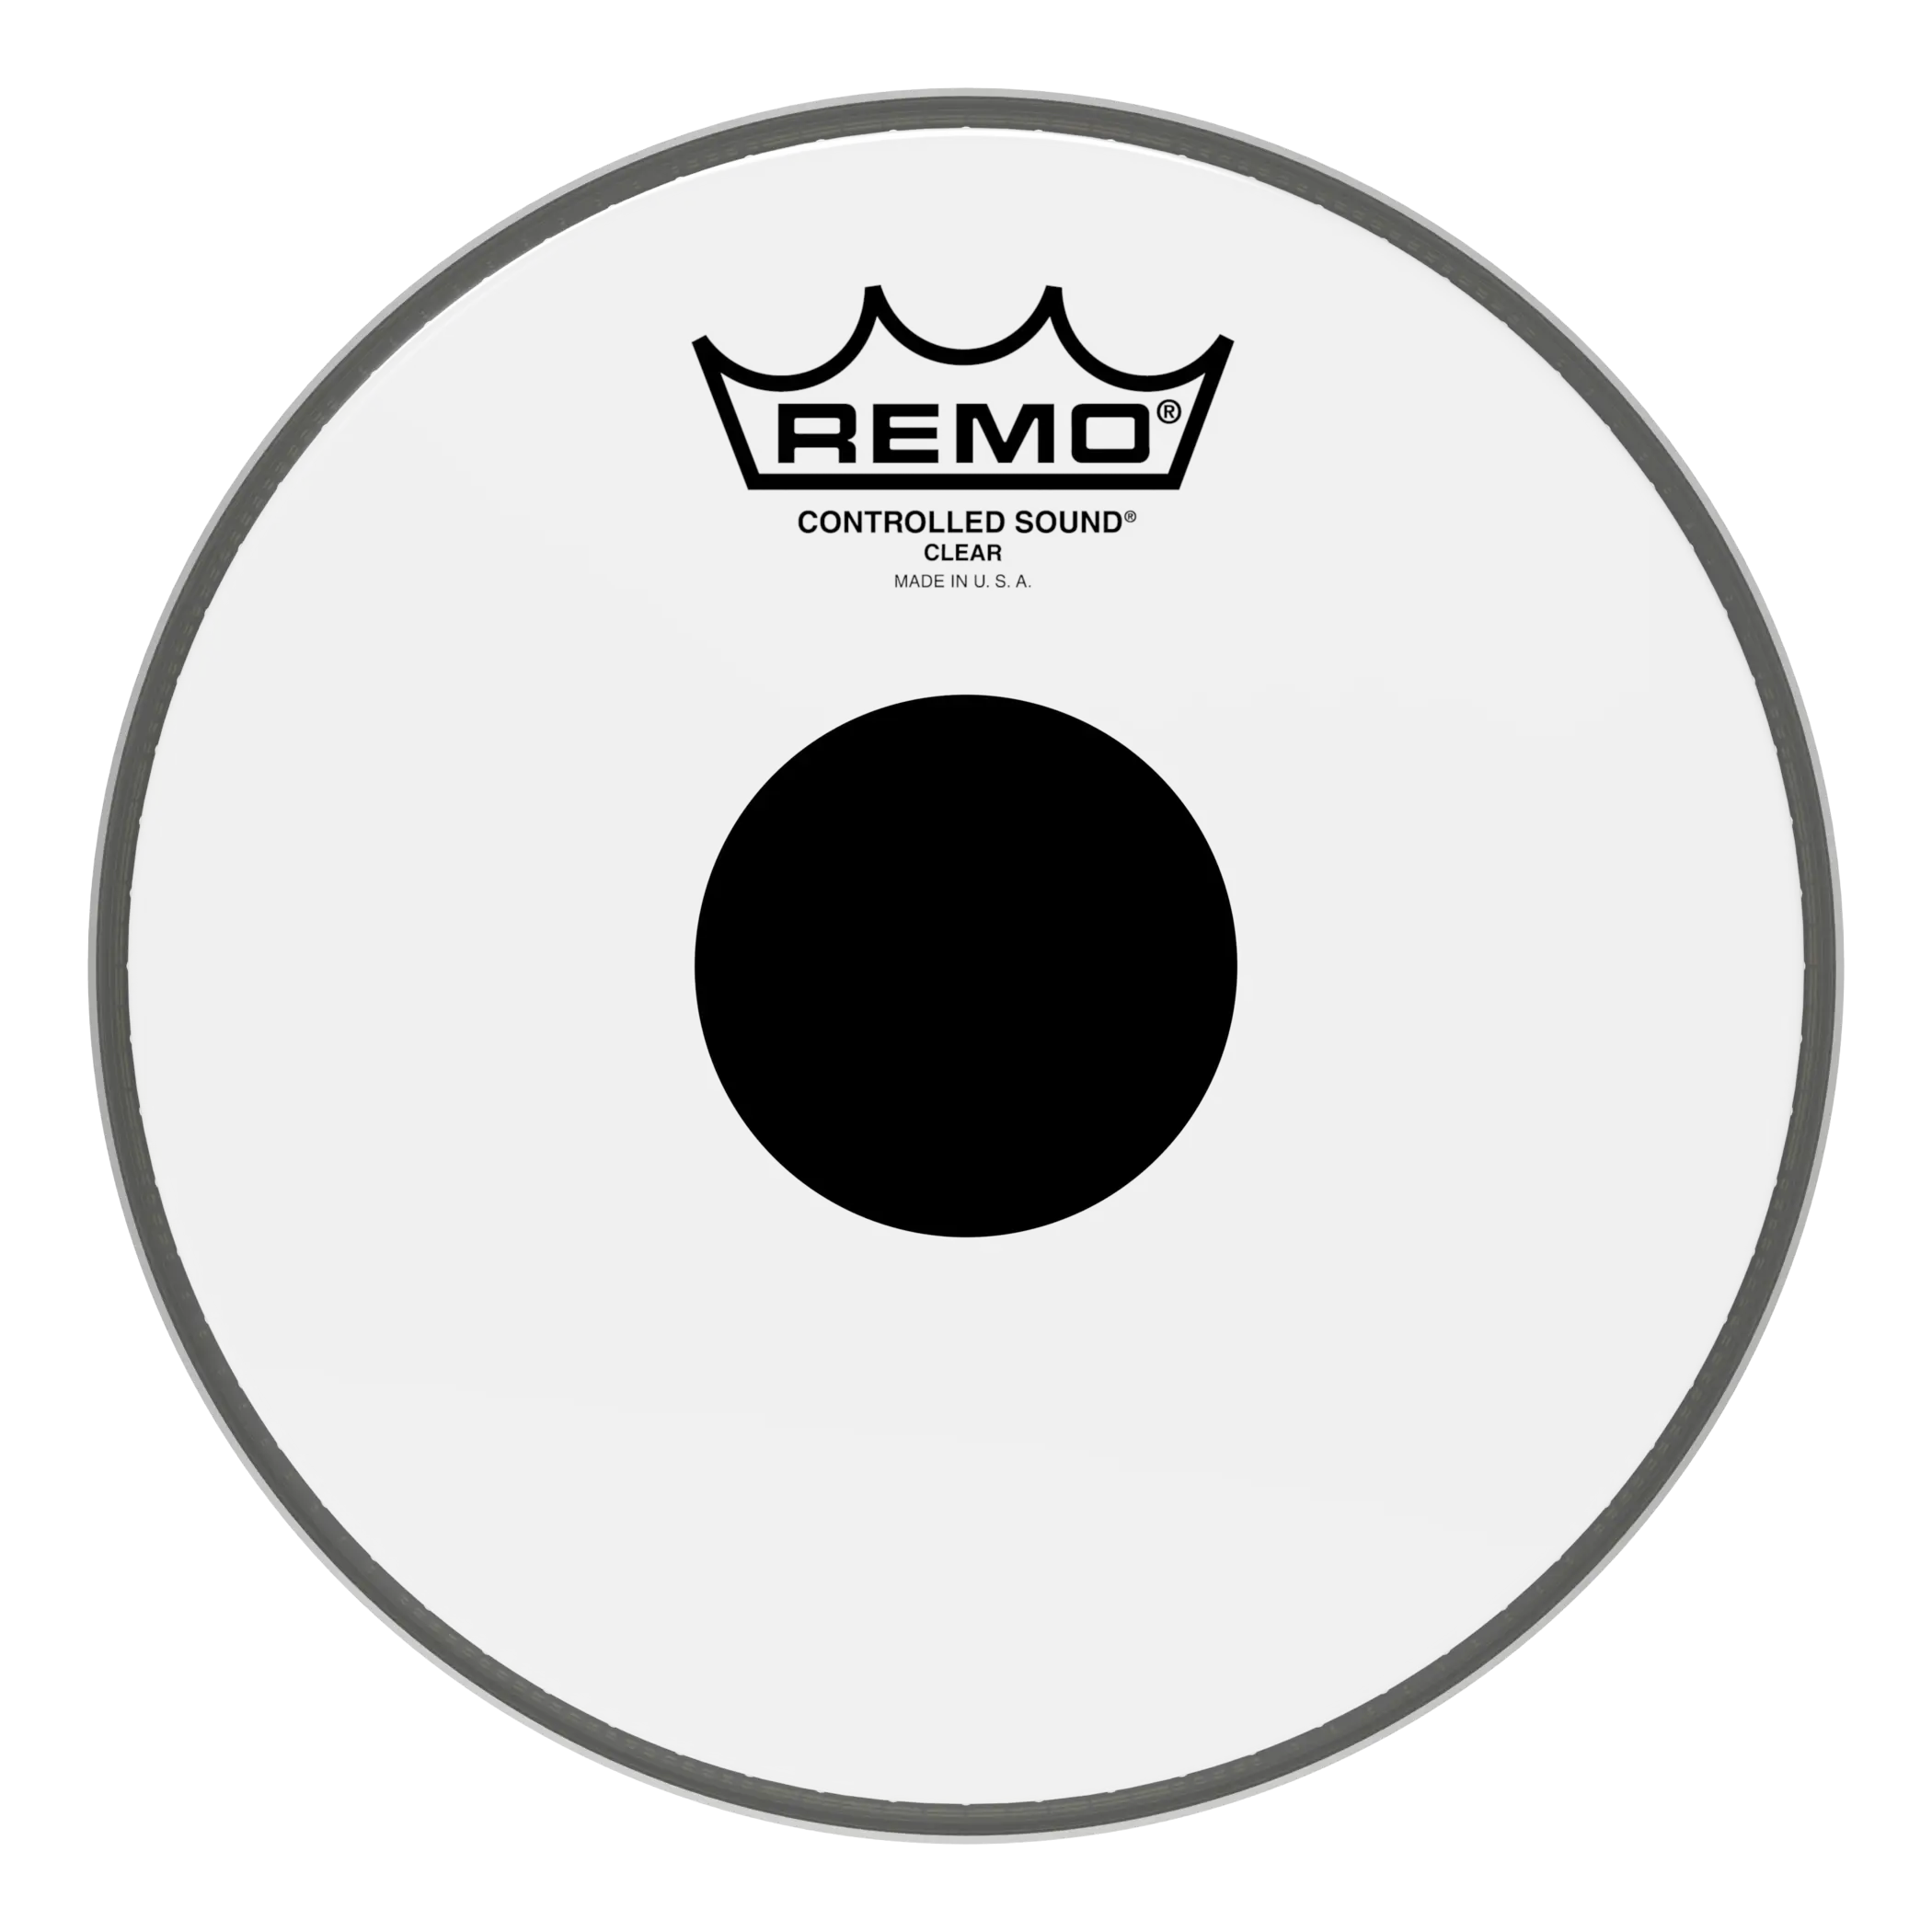 Remo 8" Controlled Sound Clear Black Dot Drumhead